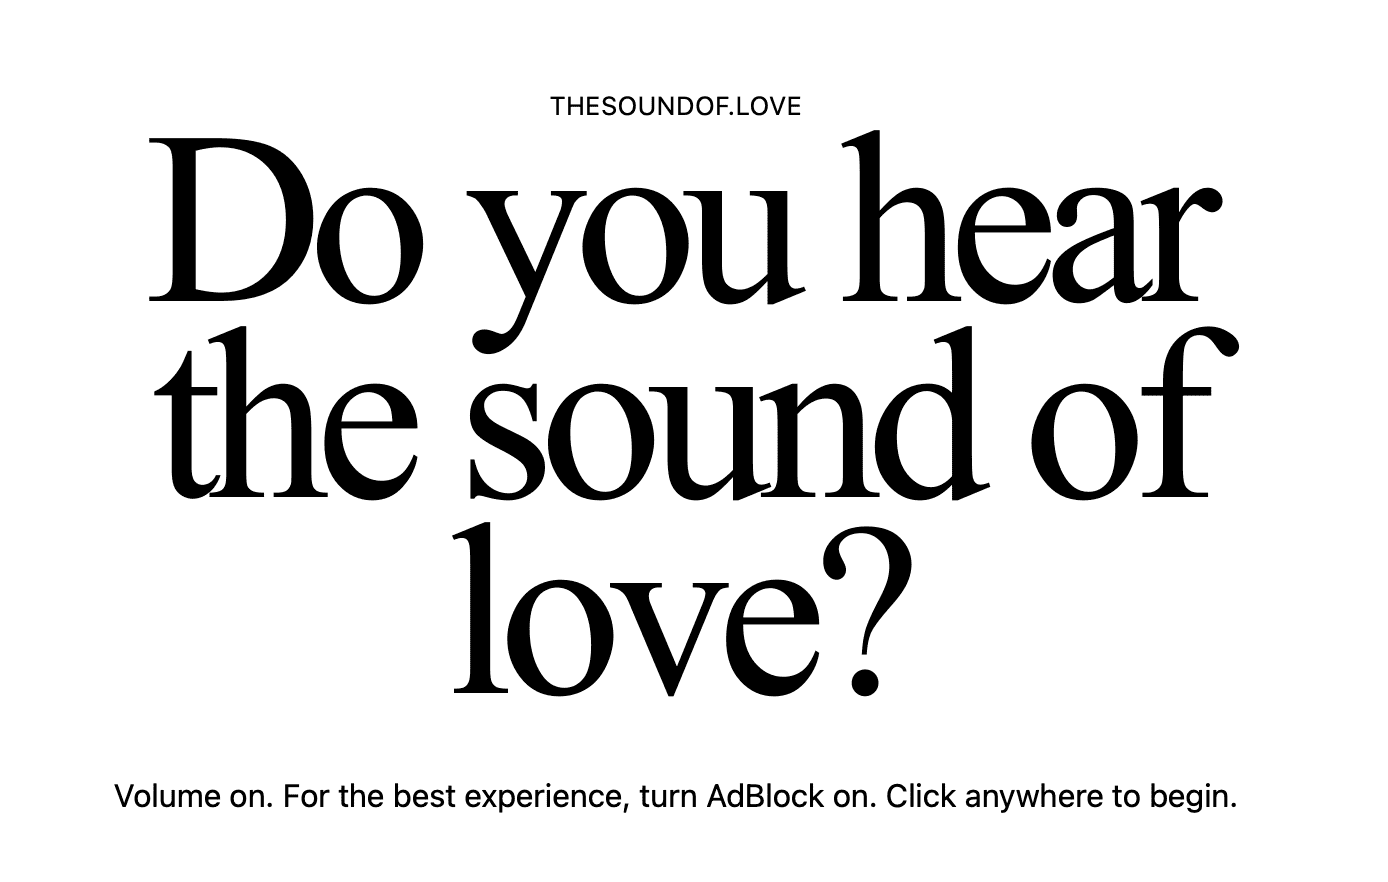 Listen to the Sound of Love